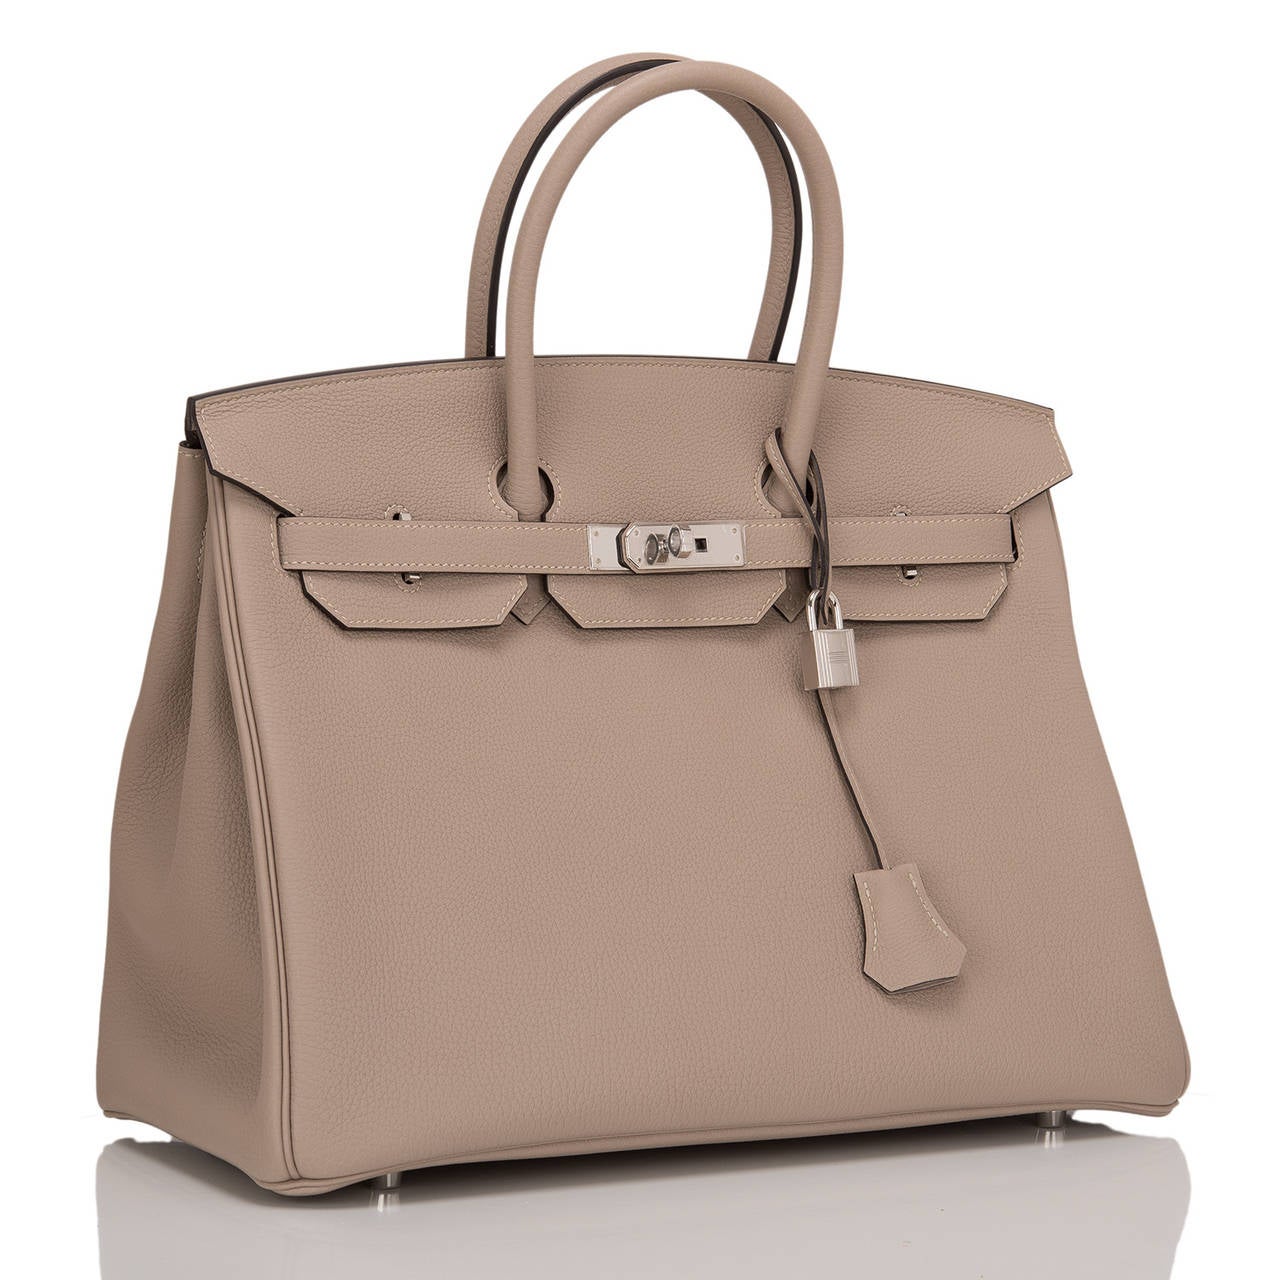 Hermes Gris Tourterelle 35cm in togo (bull) leather with palladium hardware.

This Birkin features tonal stitching, front toggle closure, clochette with lock and two keys, and double rolled handles. The interior is lined in Gris T chevre with one